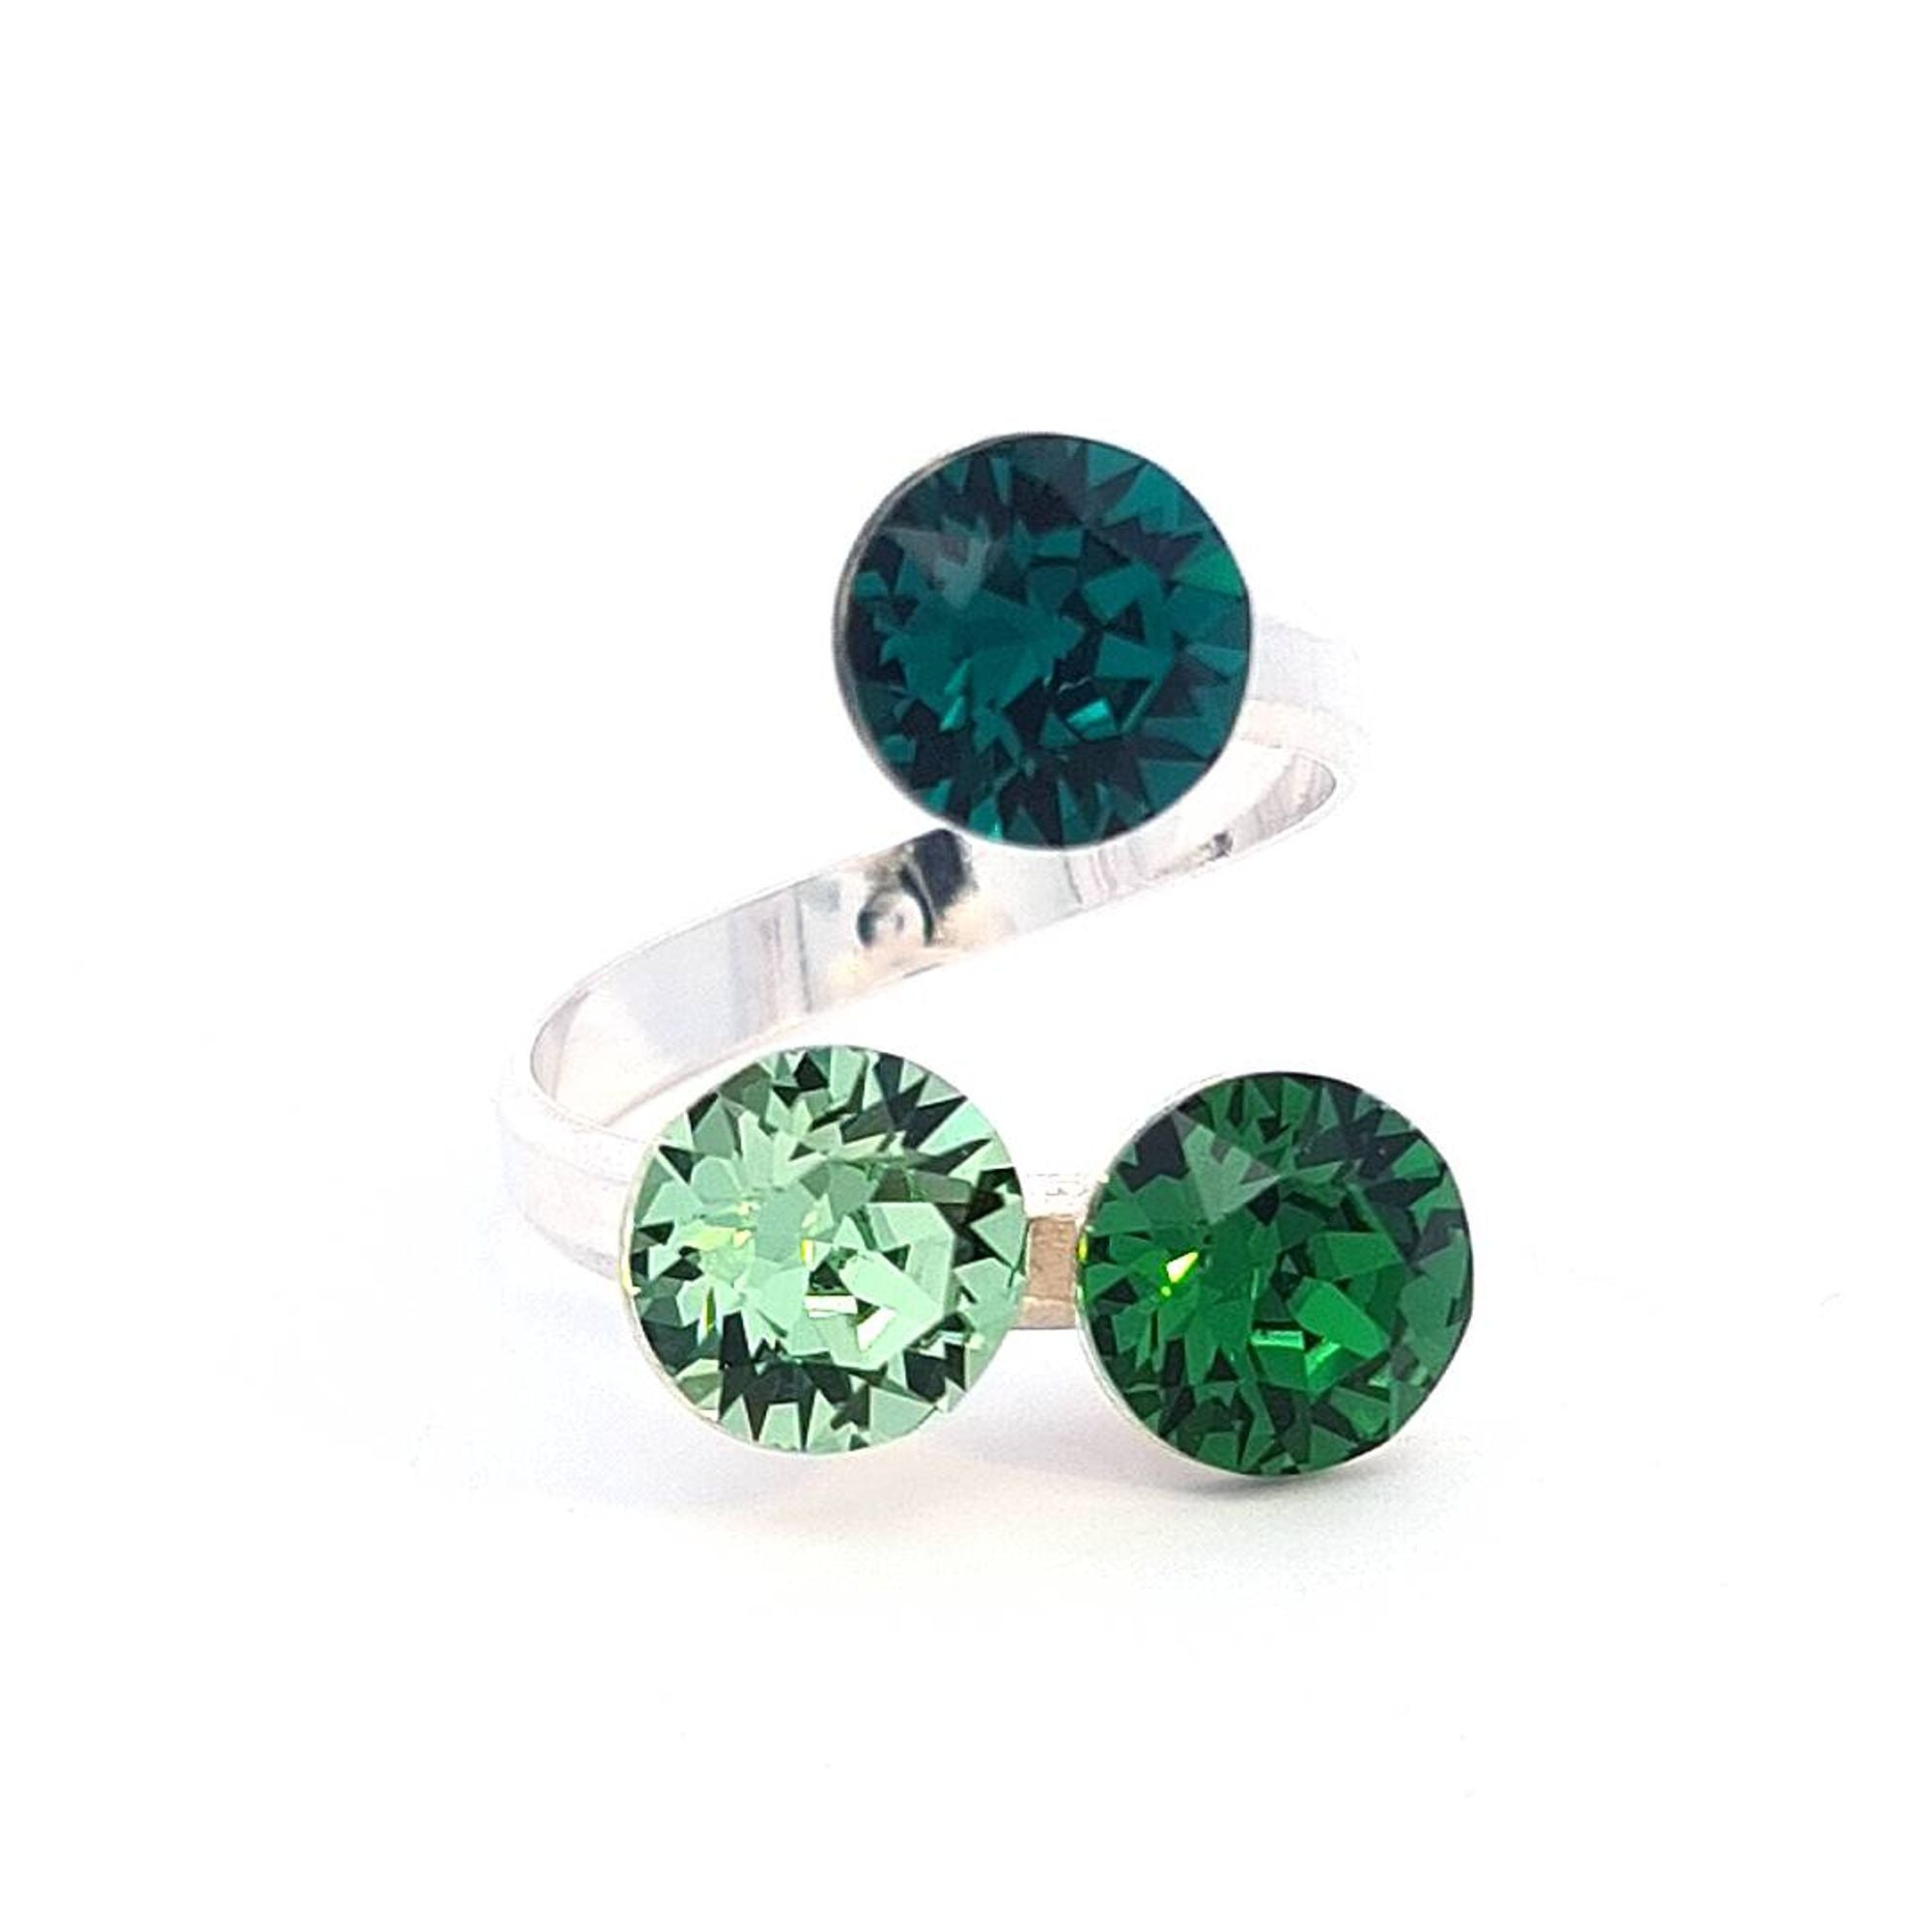 Magpie Gems Triad Treasure Cluster Ring with Luminous Emerald Green Crystals, handmade in Ireland